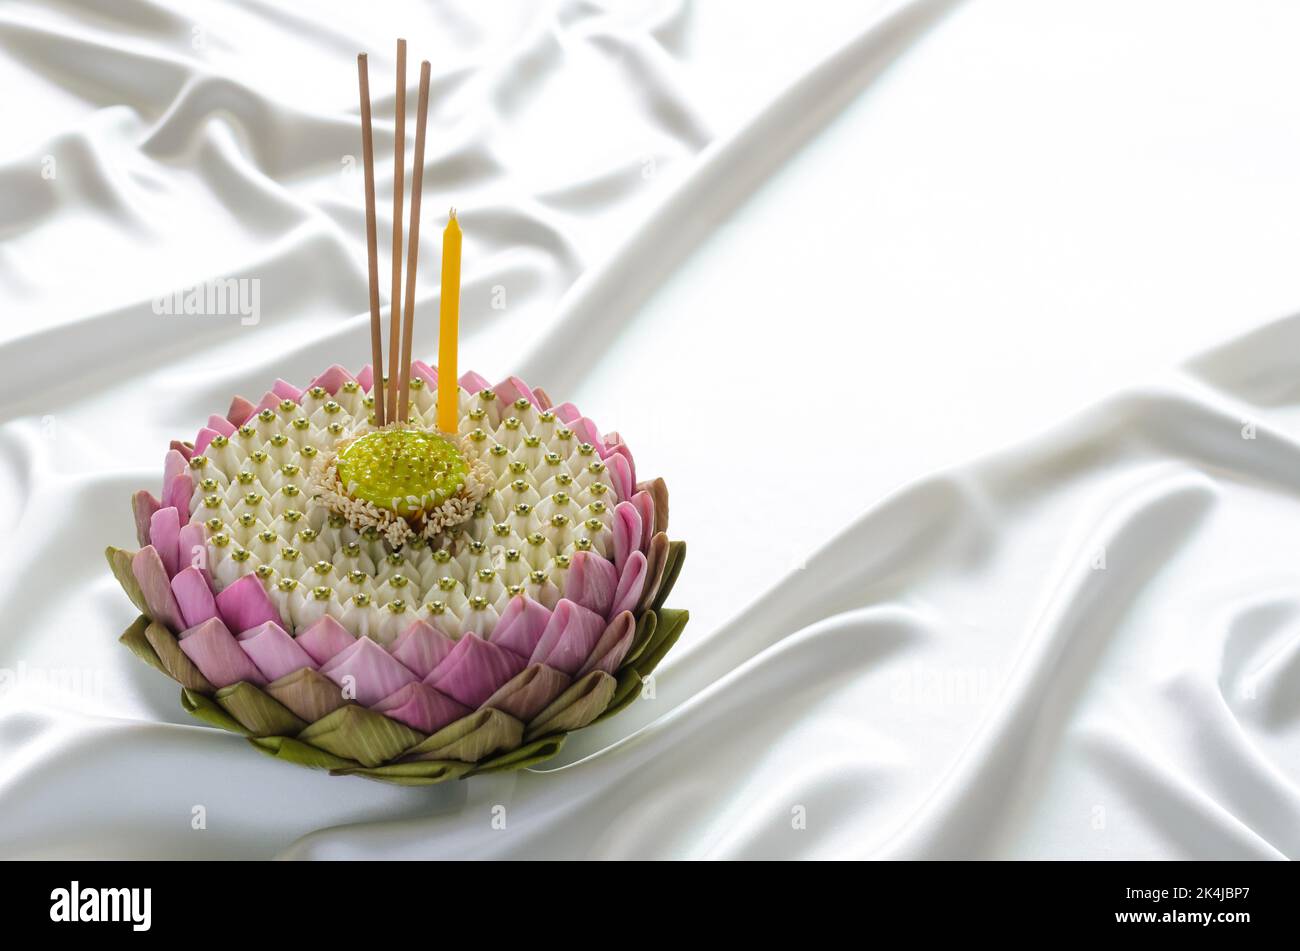 Pink lotus petal krathong for Thailand Loy Krathong festival decorates with its pollen, crown flower, incense stick and candle on smooth and wavy whit Stock Photo